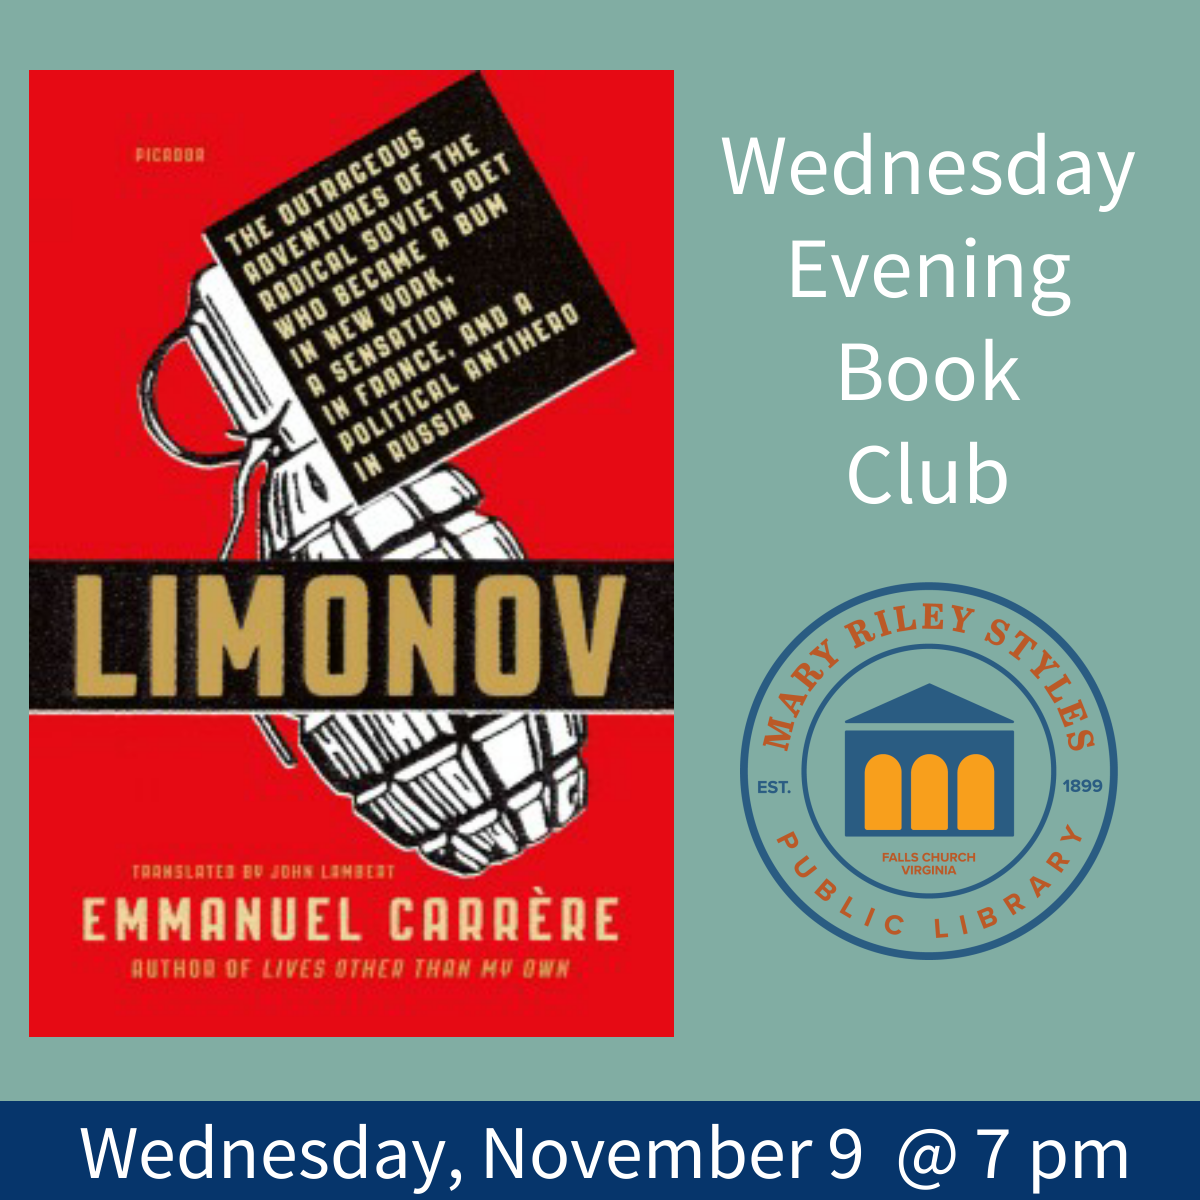 Wednesday Evening Book Club November 9 2022 at 7 pm Limonov by Emmanuel Carrere